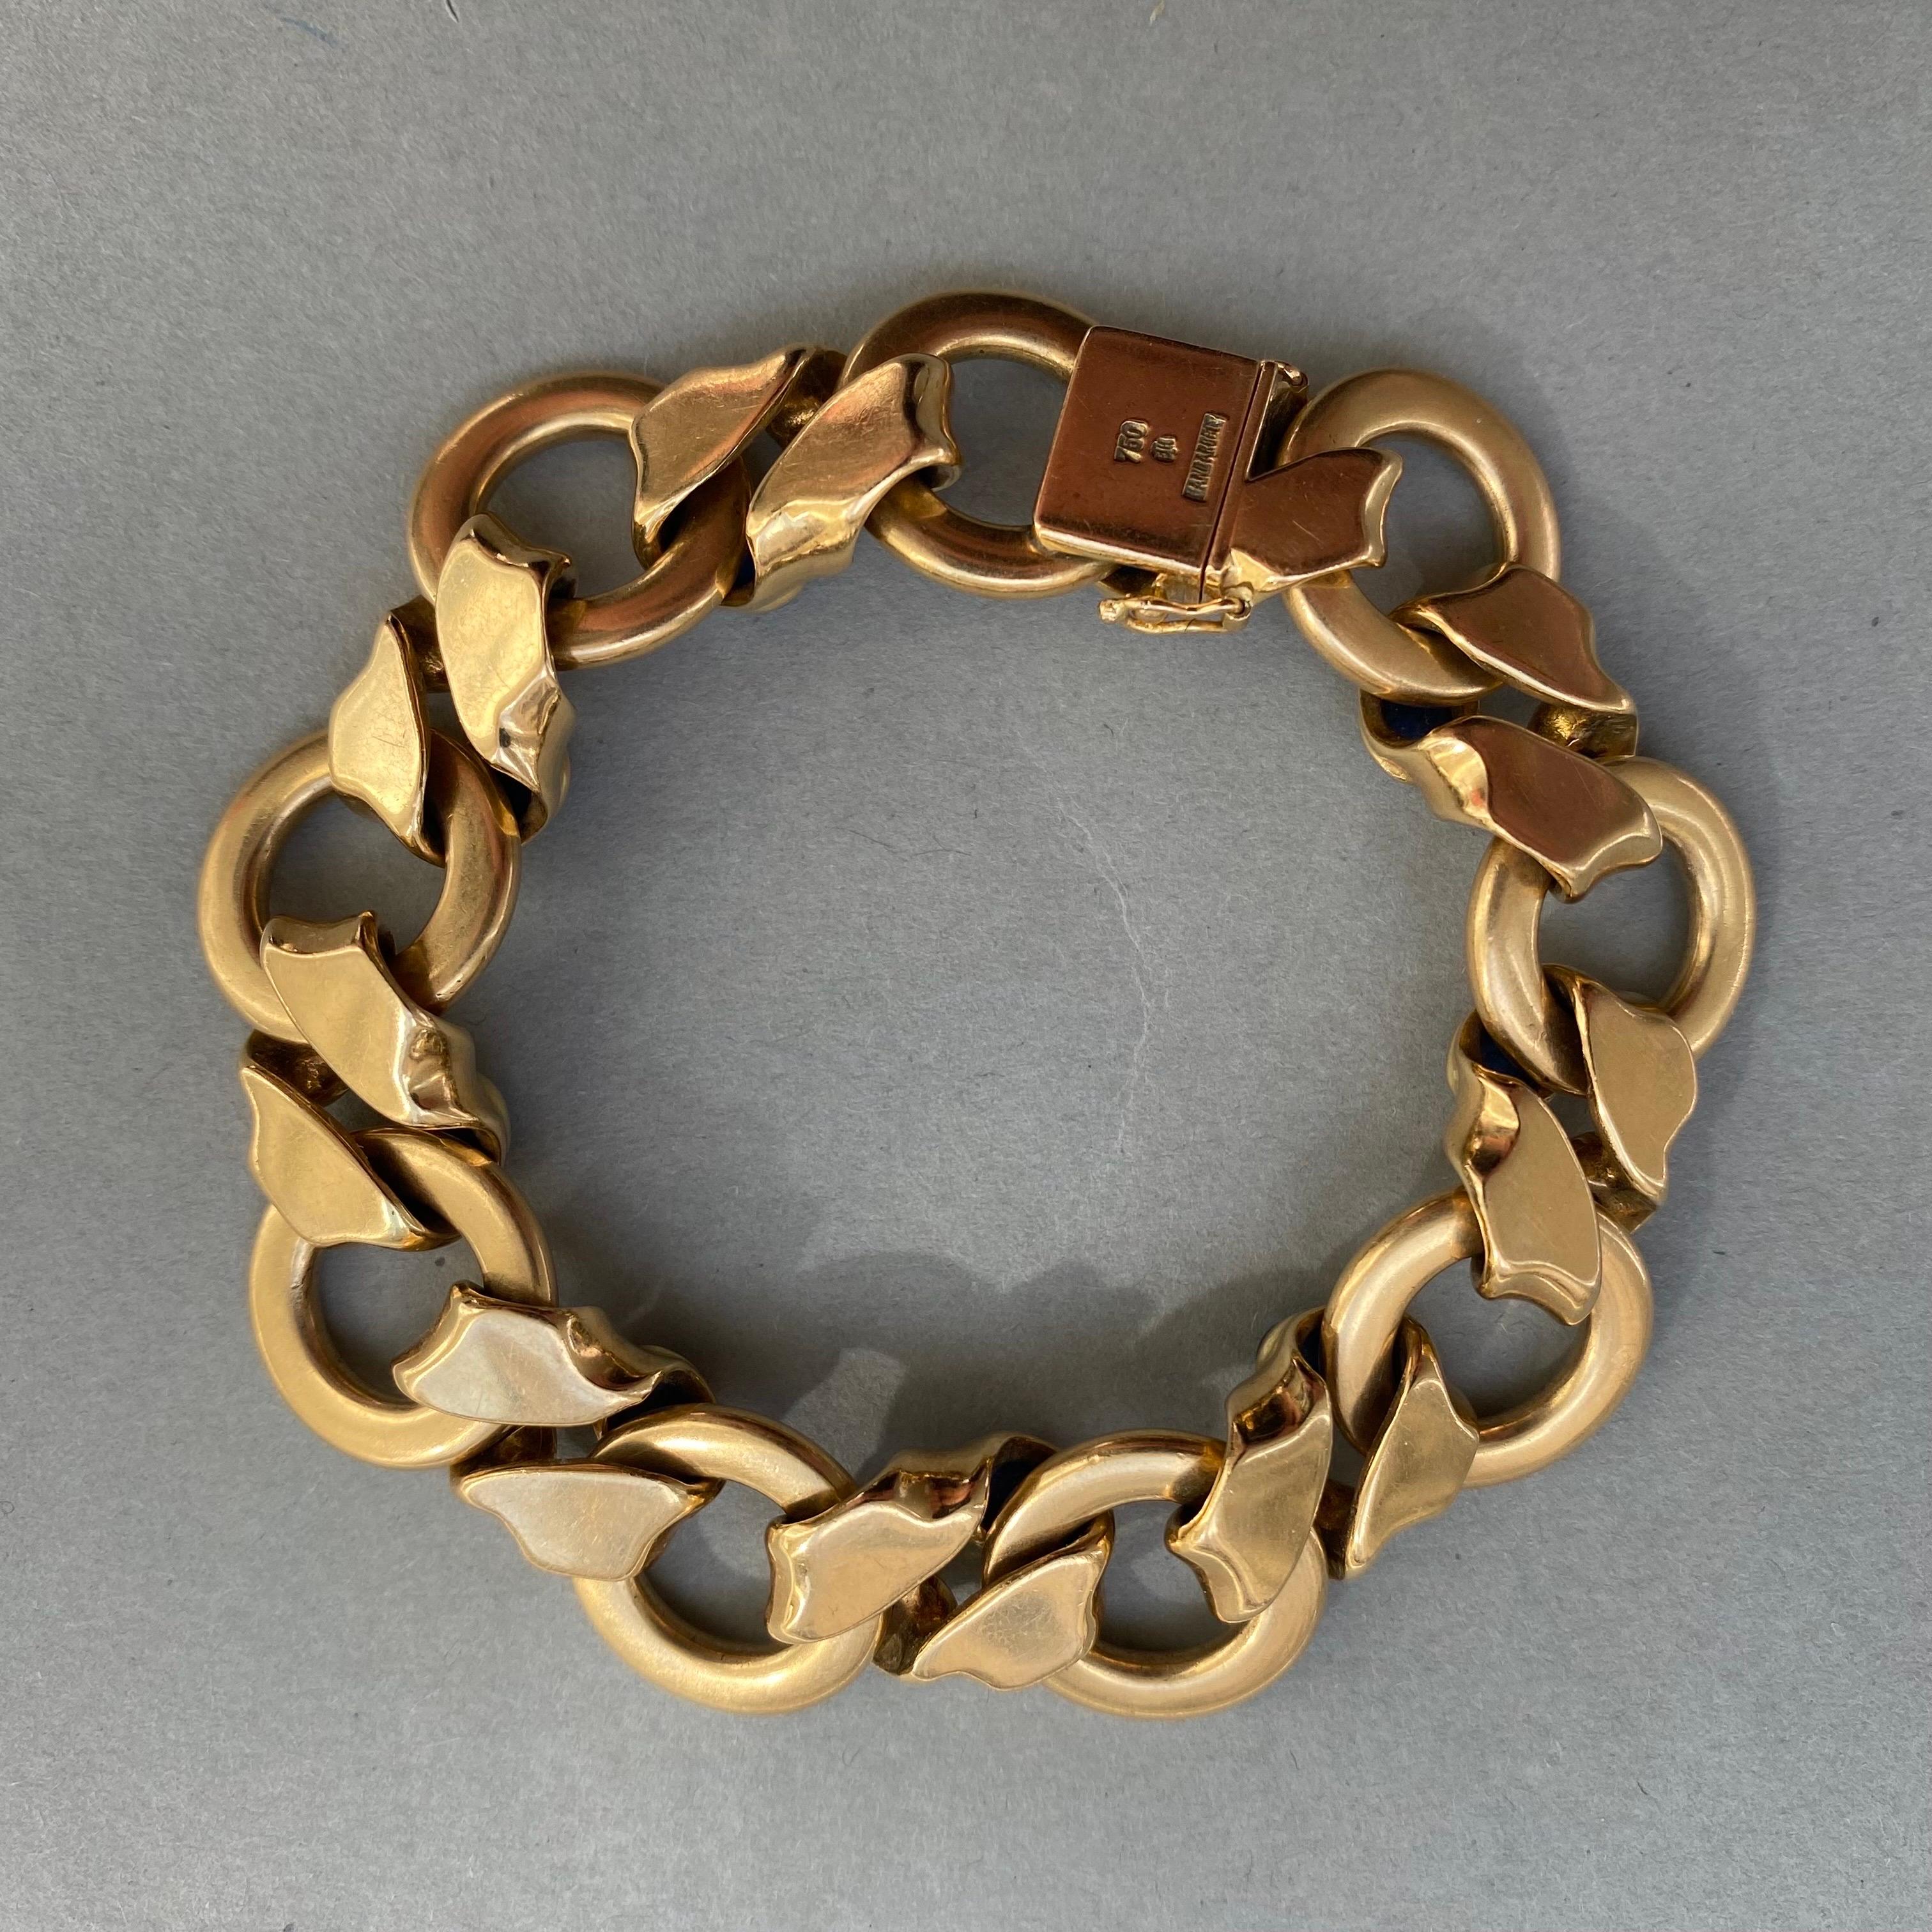 An 18 carat gold hand made bracelet with round links and connecting folded links that each have two oval cabochon cut sapphires (each app. 0.6 carat and in total app. 5.4 carat) with a hidden lock and a German master mark ETH.

weight: 71.18